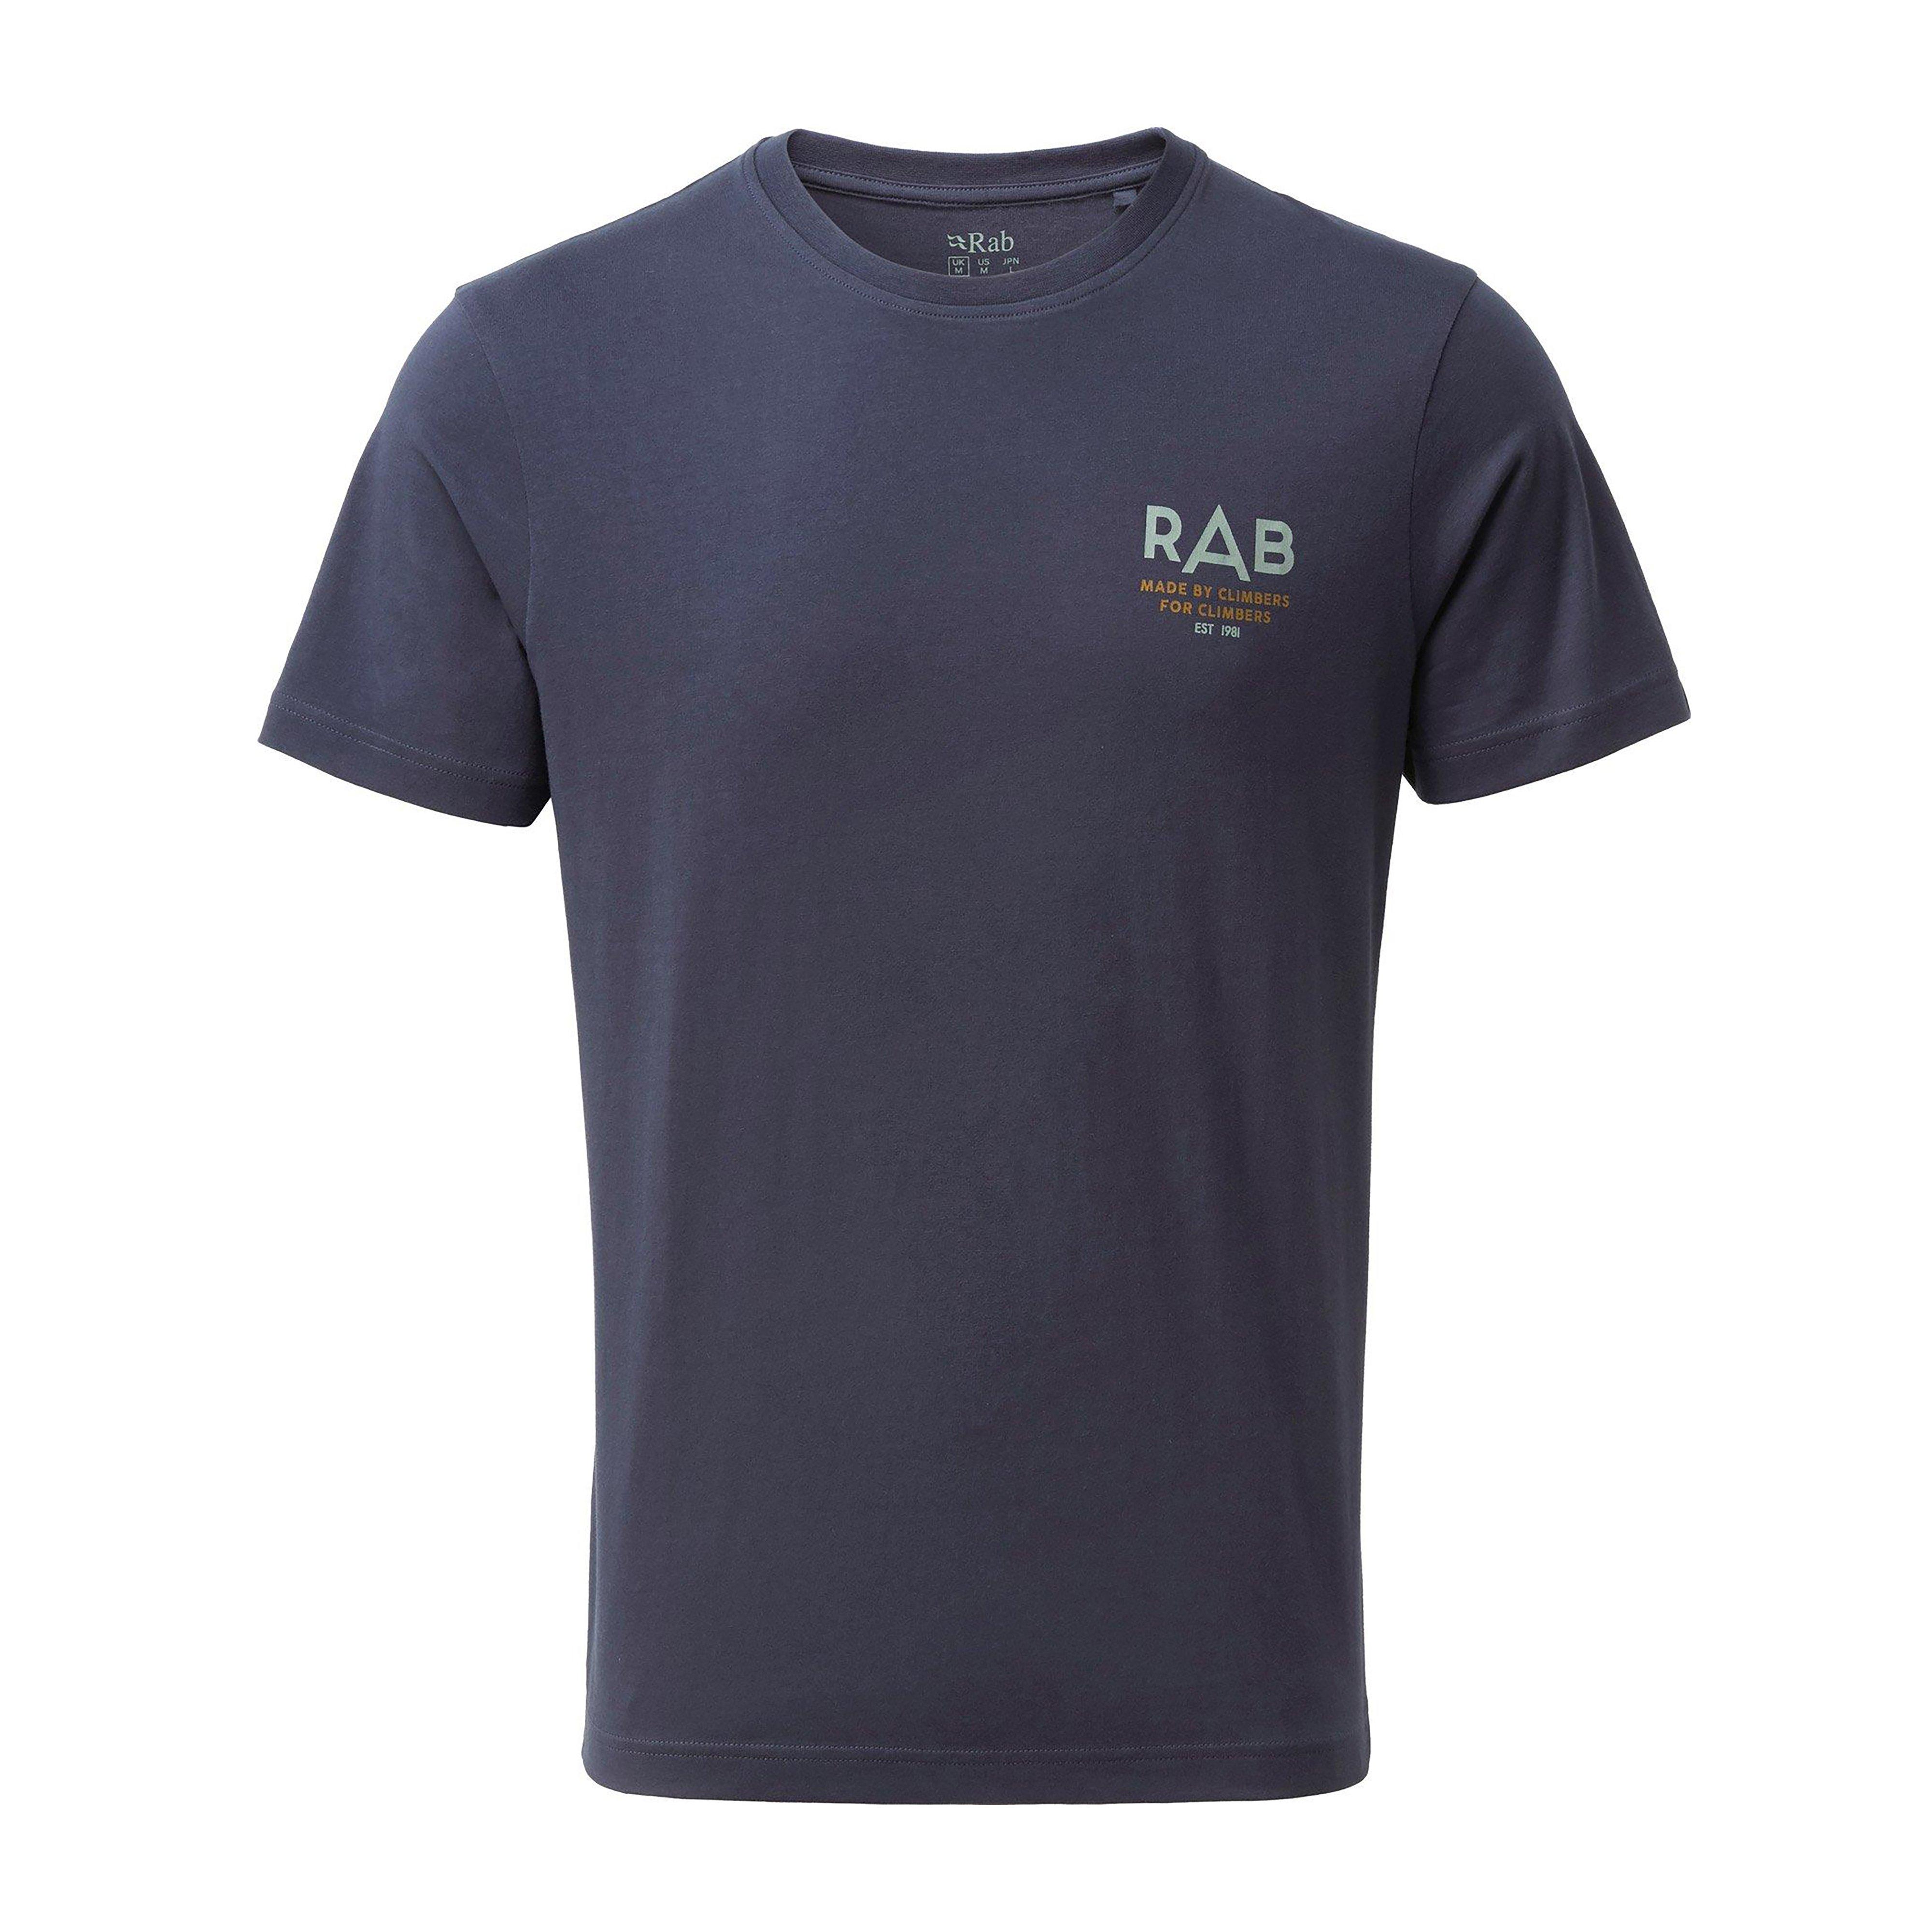 Rab Men's Stance Sunrise SS Tee Review